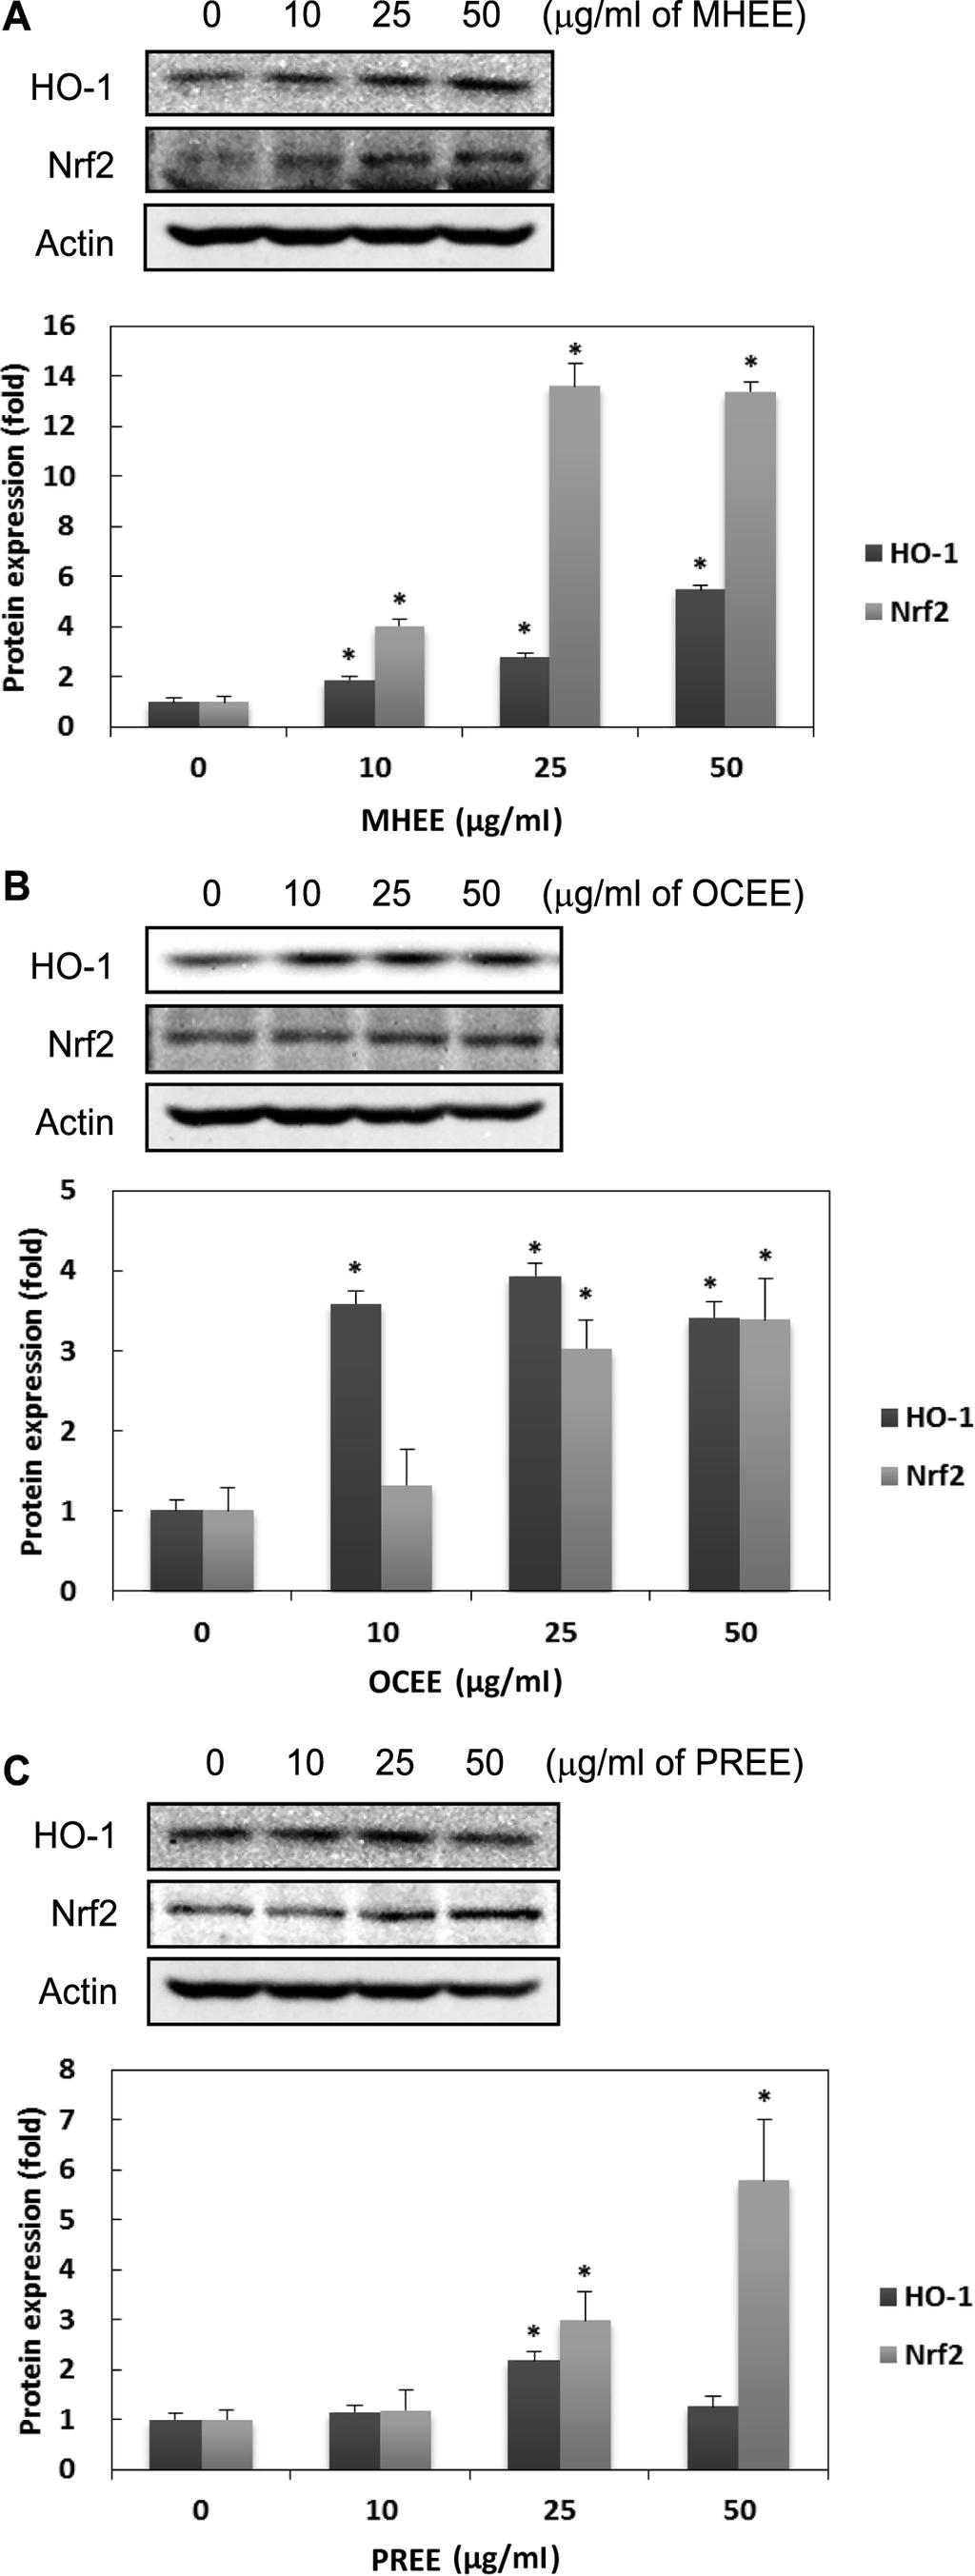 Biological Activities of Three Chinese Plants 279 Fig. 2. Effect of MHEE (A), OCEE (B), and PREE (C) on LPSinduced ROS scavenging activity in RAW 264.7 cells.